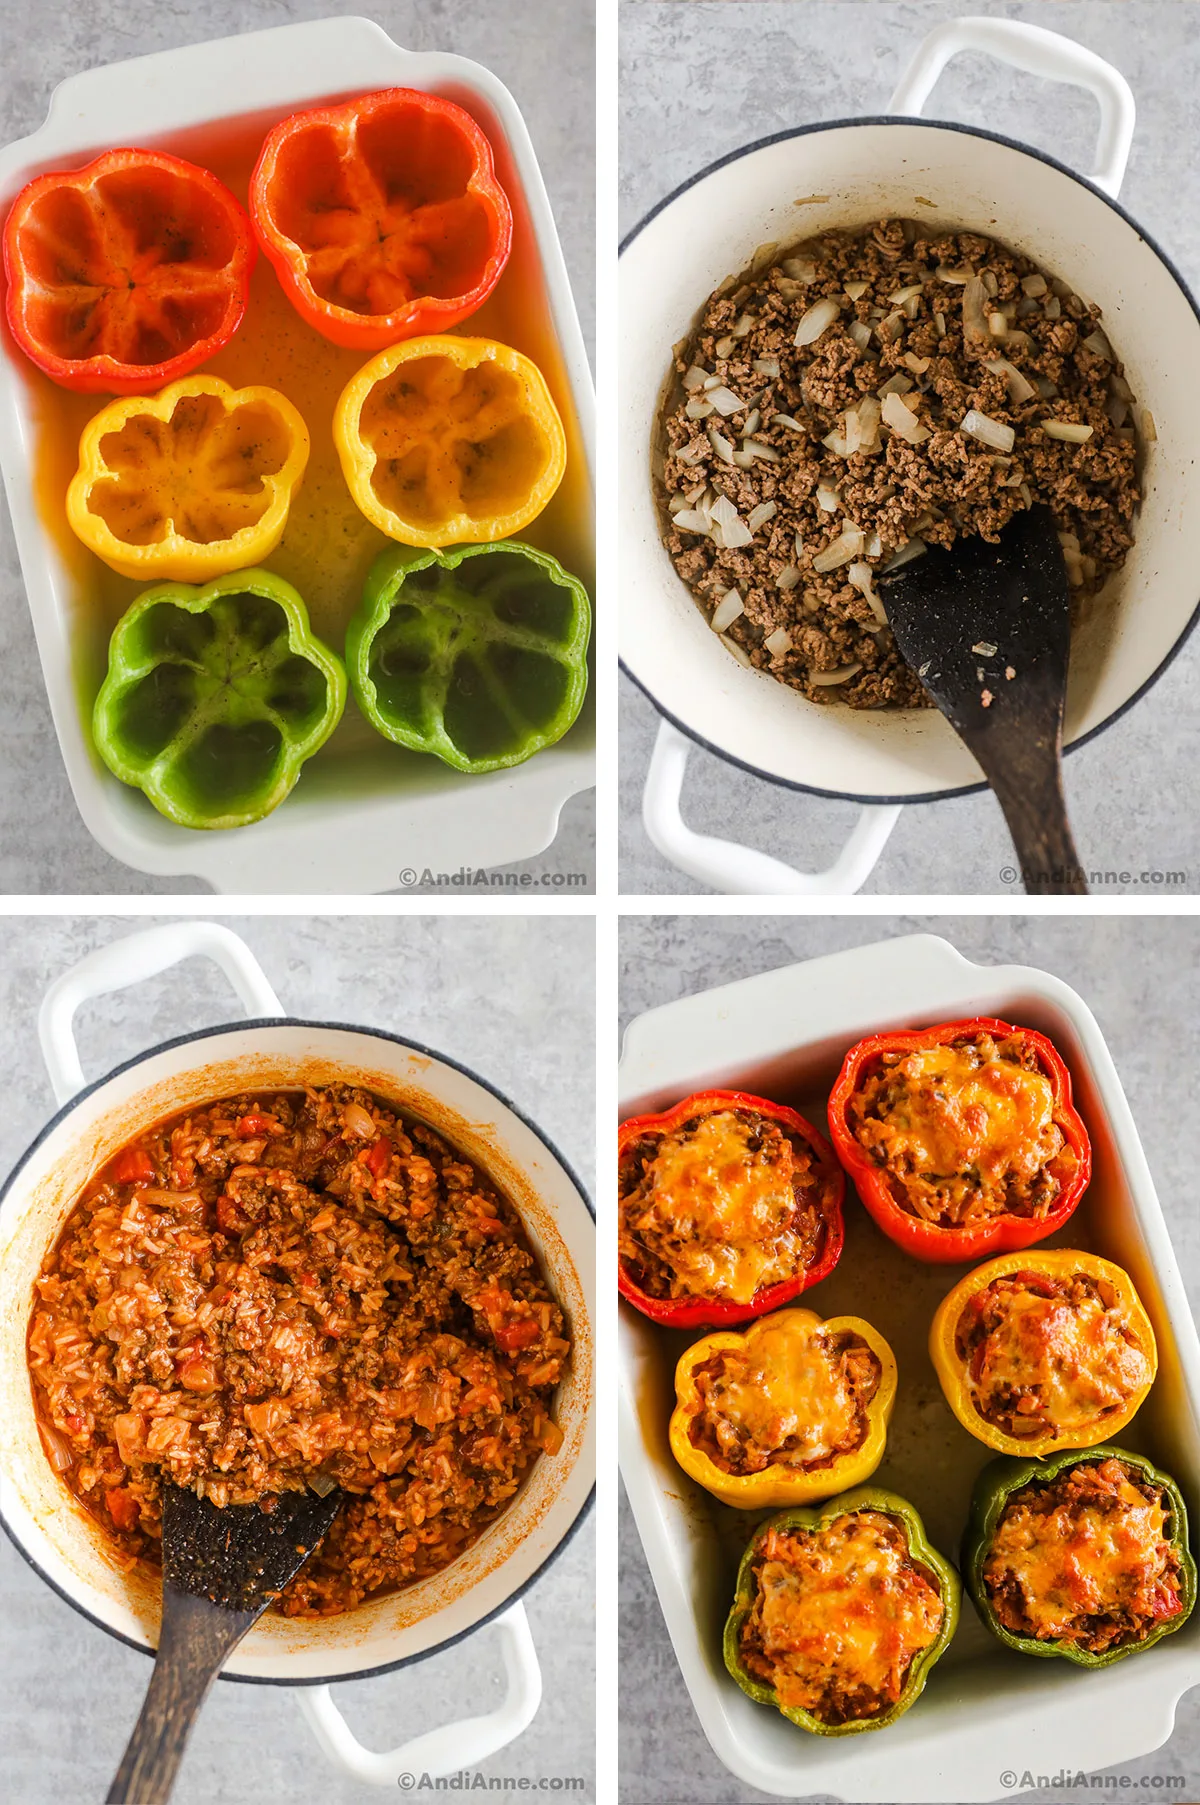 Four images showing steps to make recipe. First is white dish with sliced bell peppers. Second is browned beef in a pot. Third is ground beef rice mixture in a tomato sauce. Fourth is stuffed bell peppers with cheese on top.